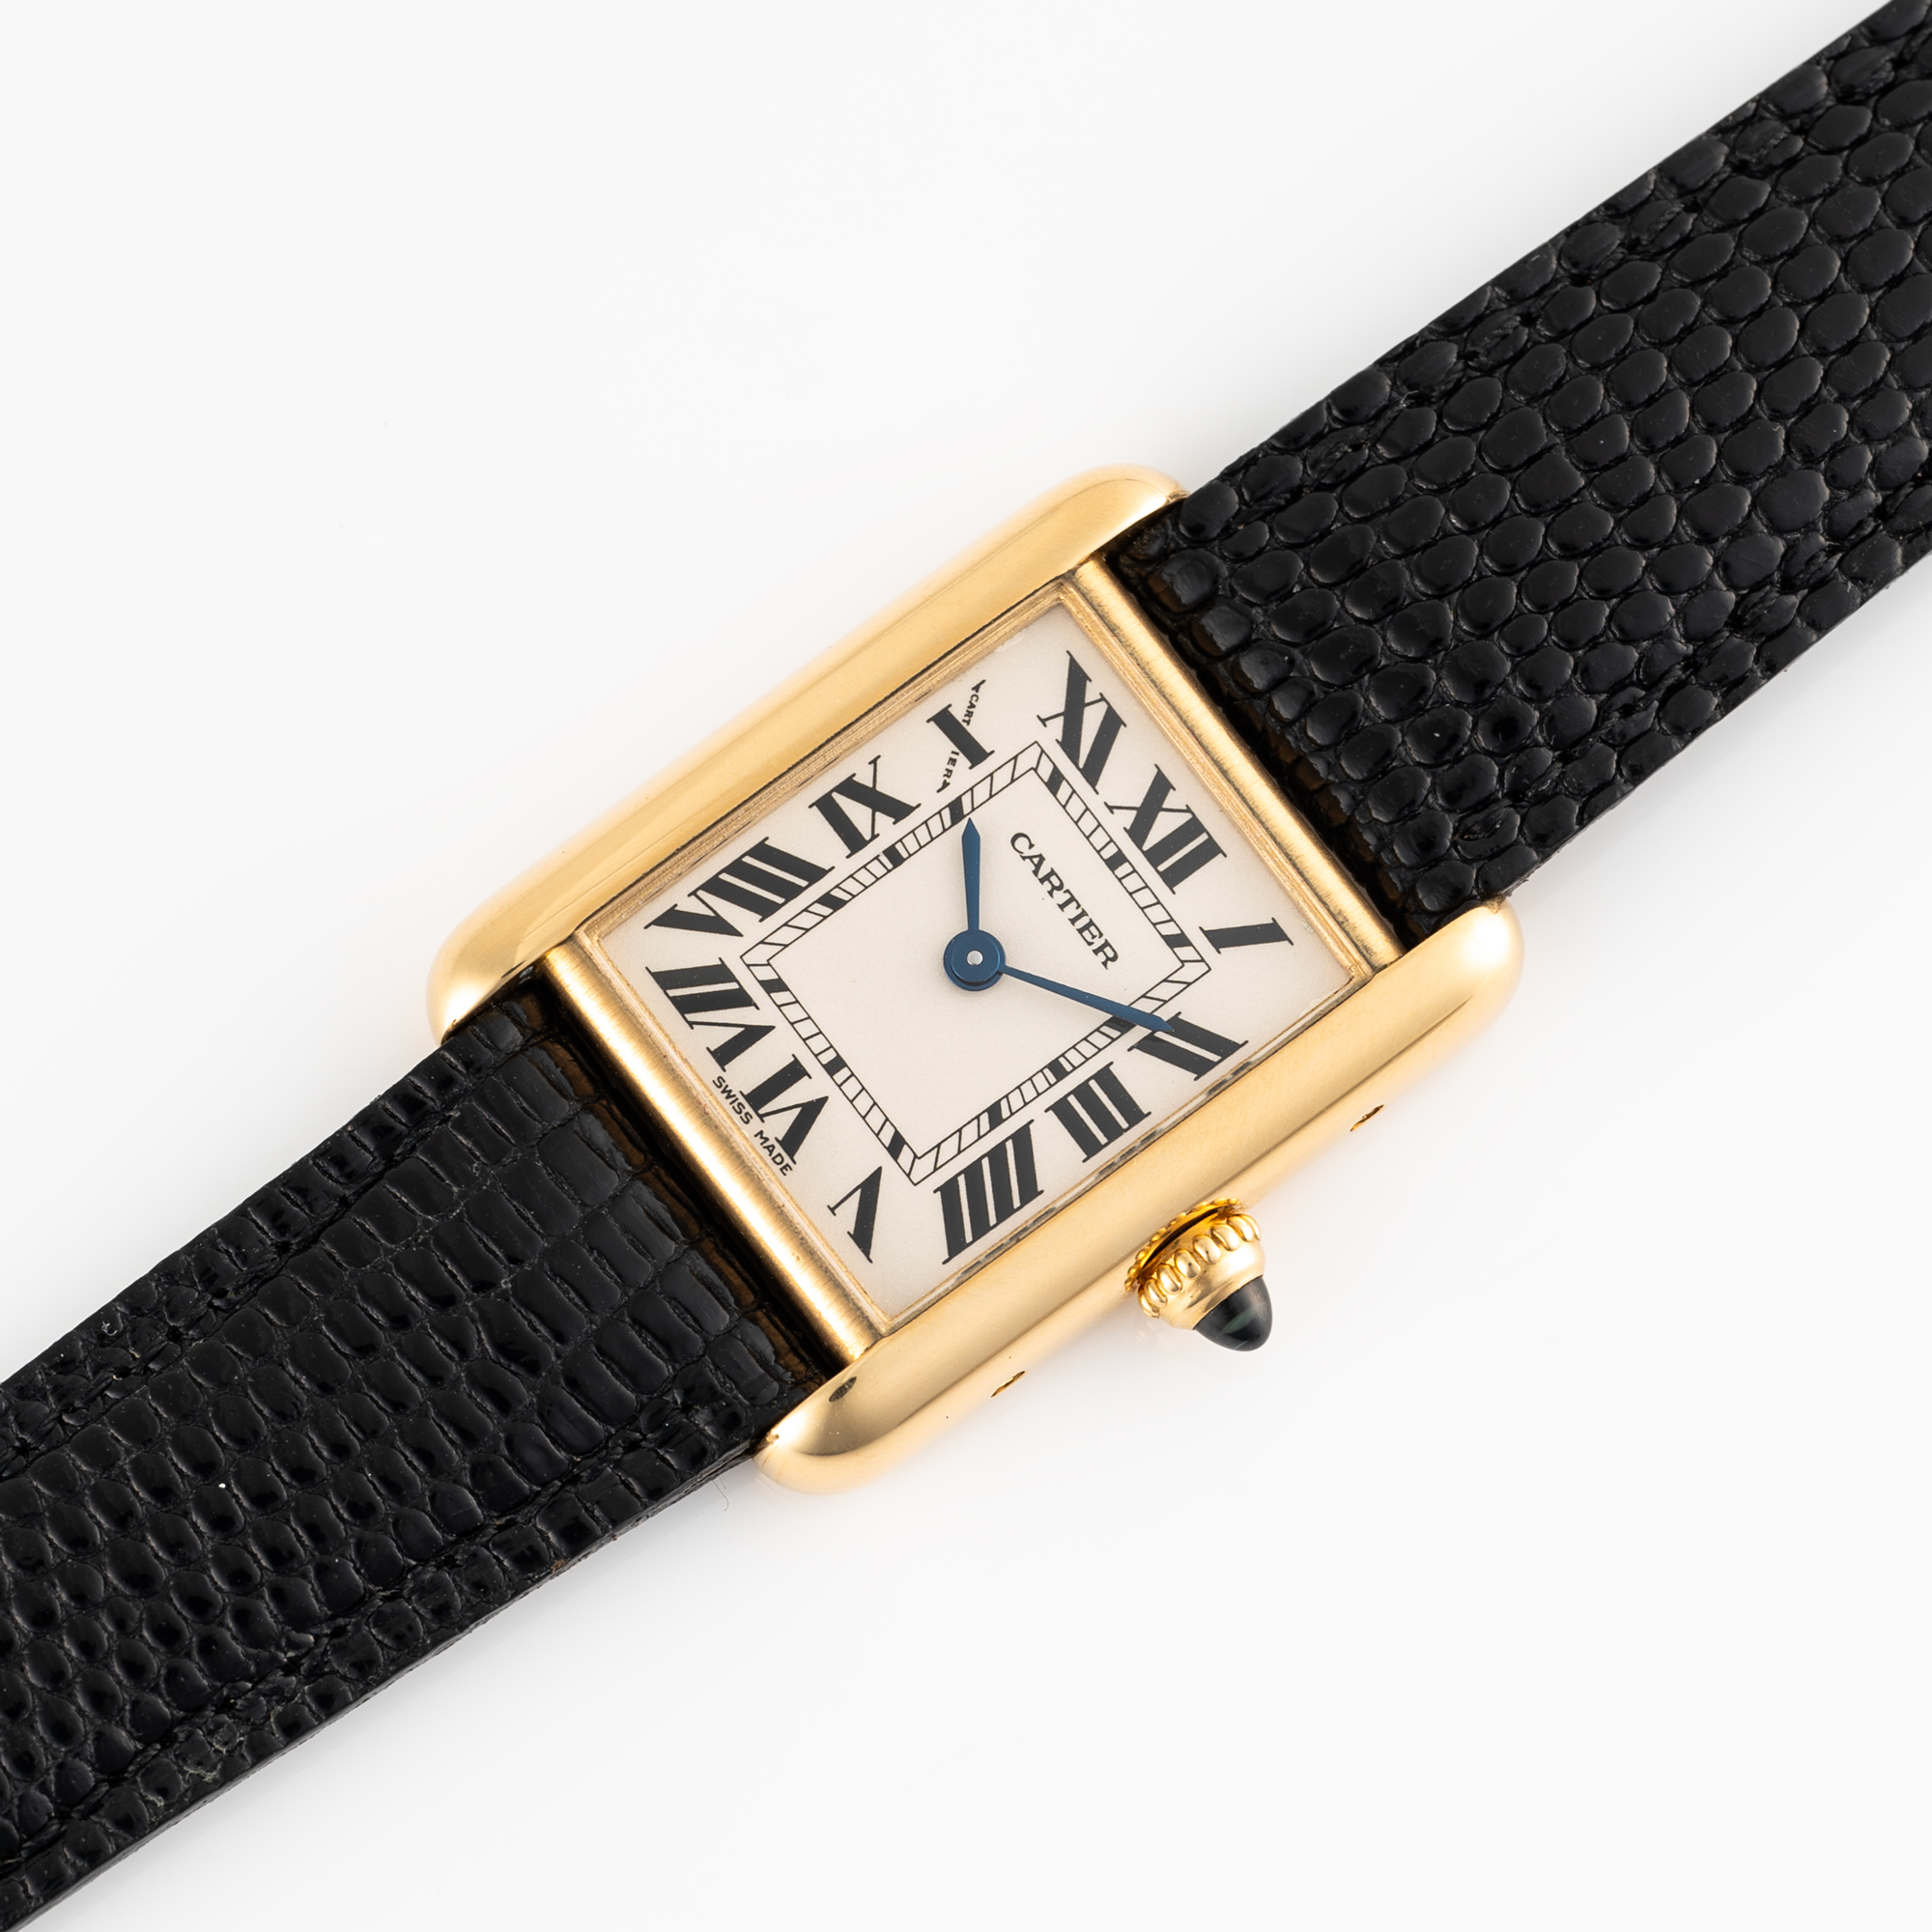 A LADY'S 18K SOLID GOLD CARTIER TANK LOUIS WRIST WATCH CIRCA 2000s, REF. 2442 WITH CARTIER SERVICE - Image 4 of 8